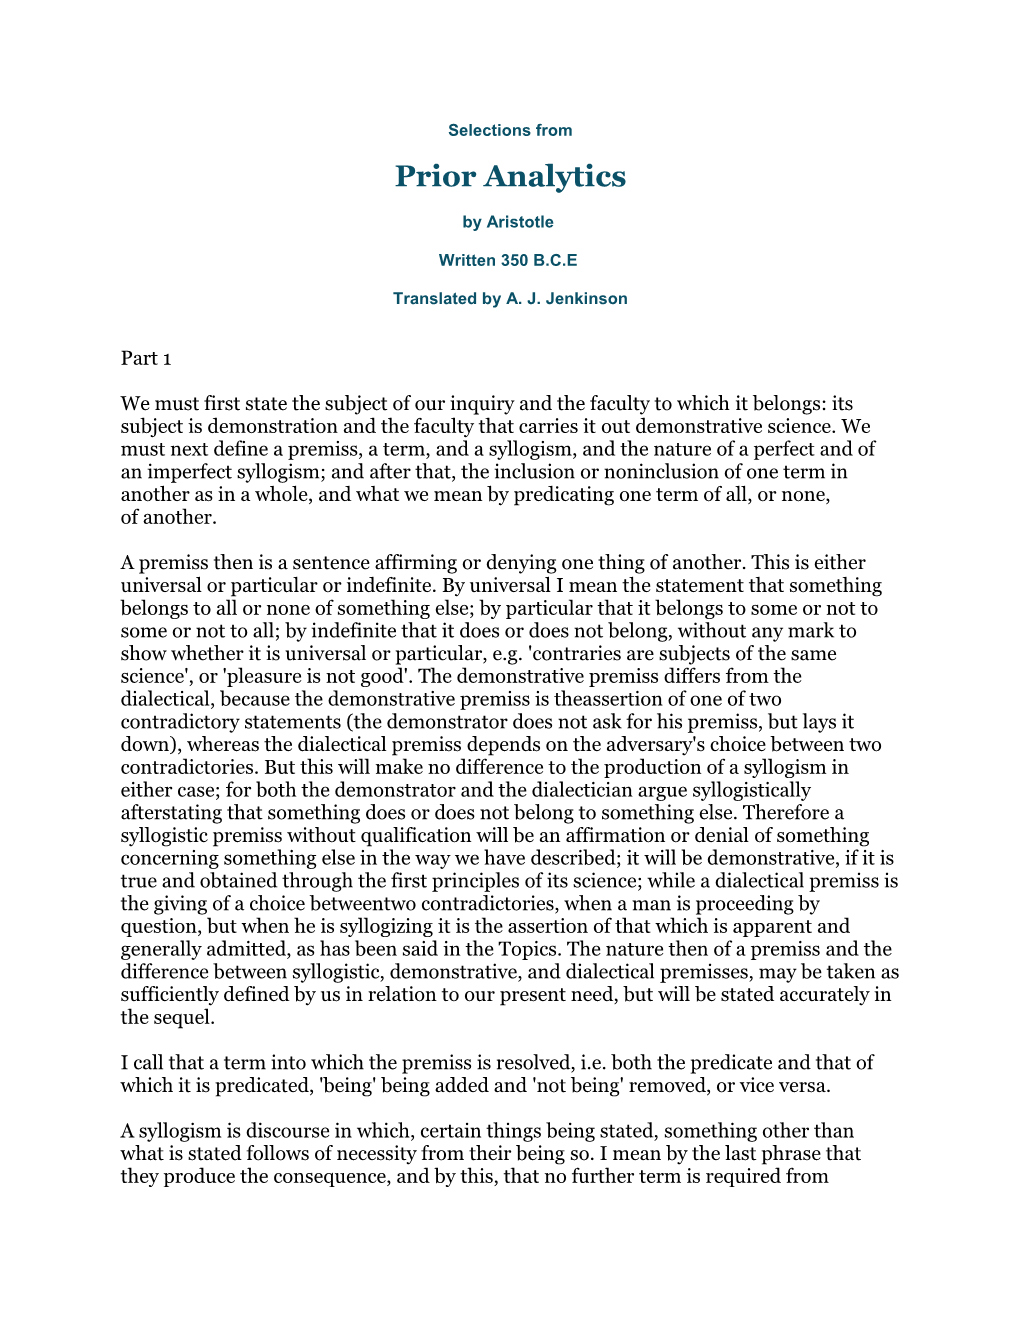 Selections from Prior Analytics